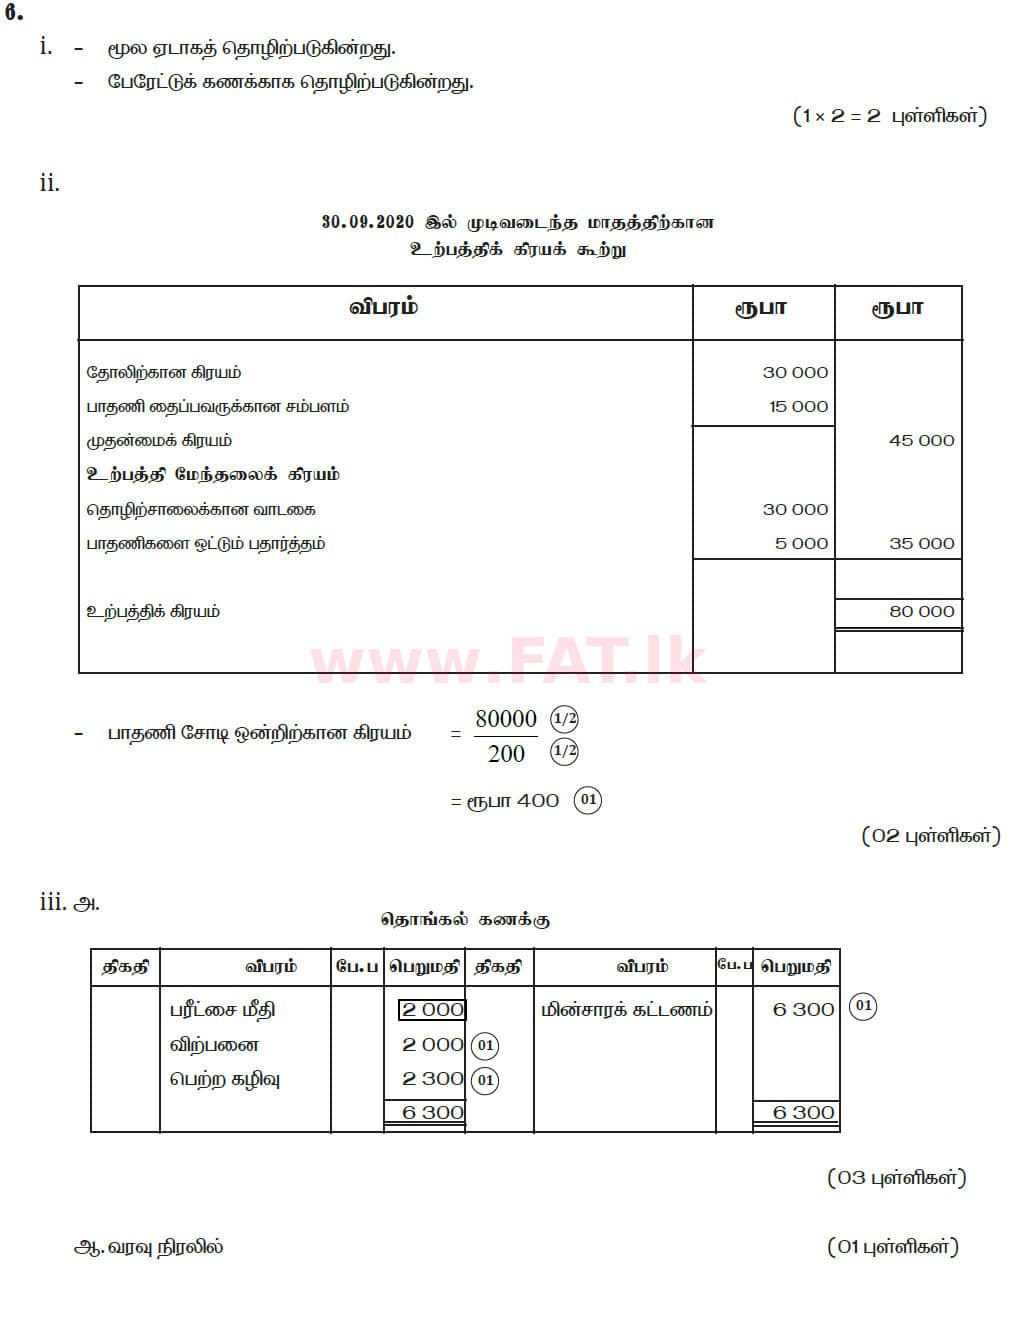 National Syllabus : Ordinary Level (O/L) Business and Accounting Studies - 2020 March - Paper II (தமிழ் Medium) 6 5786